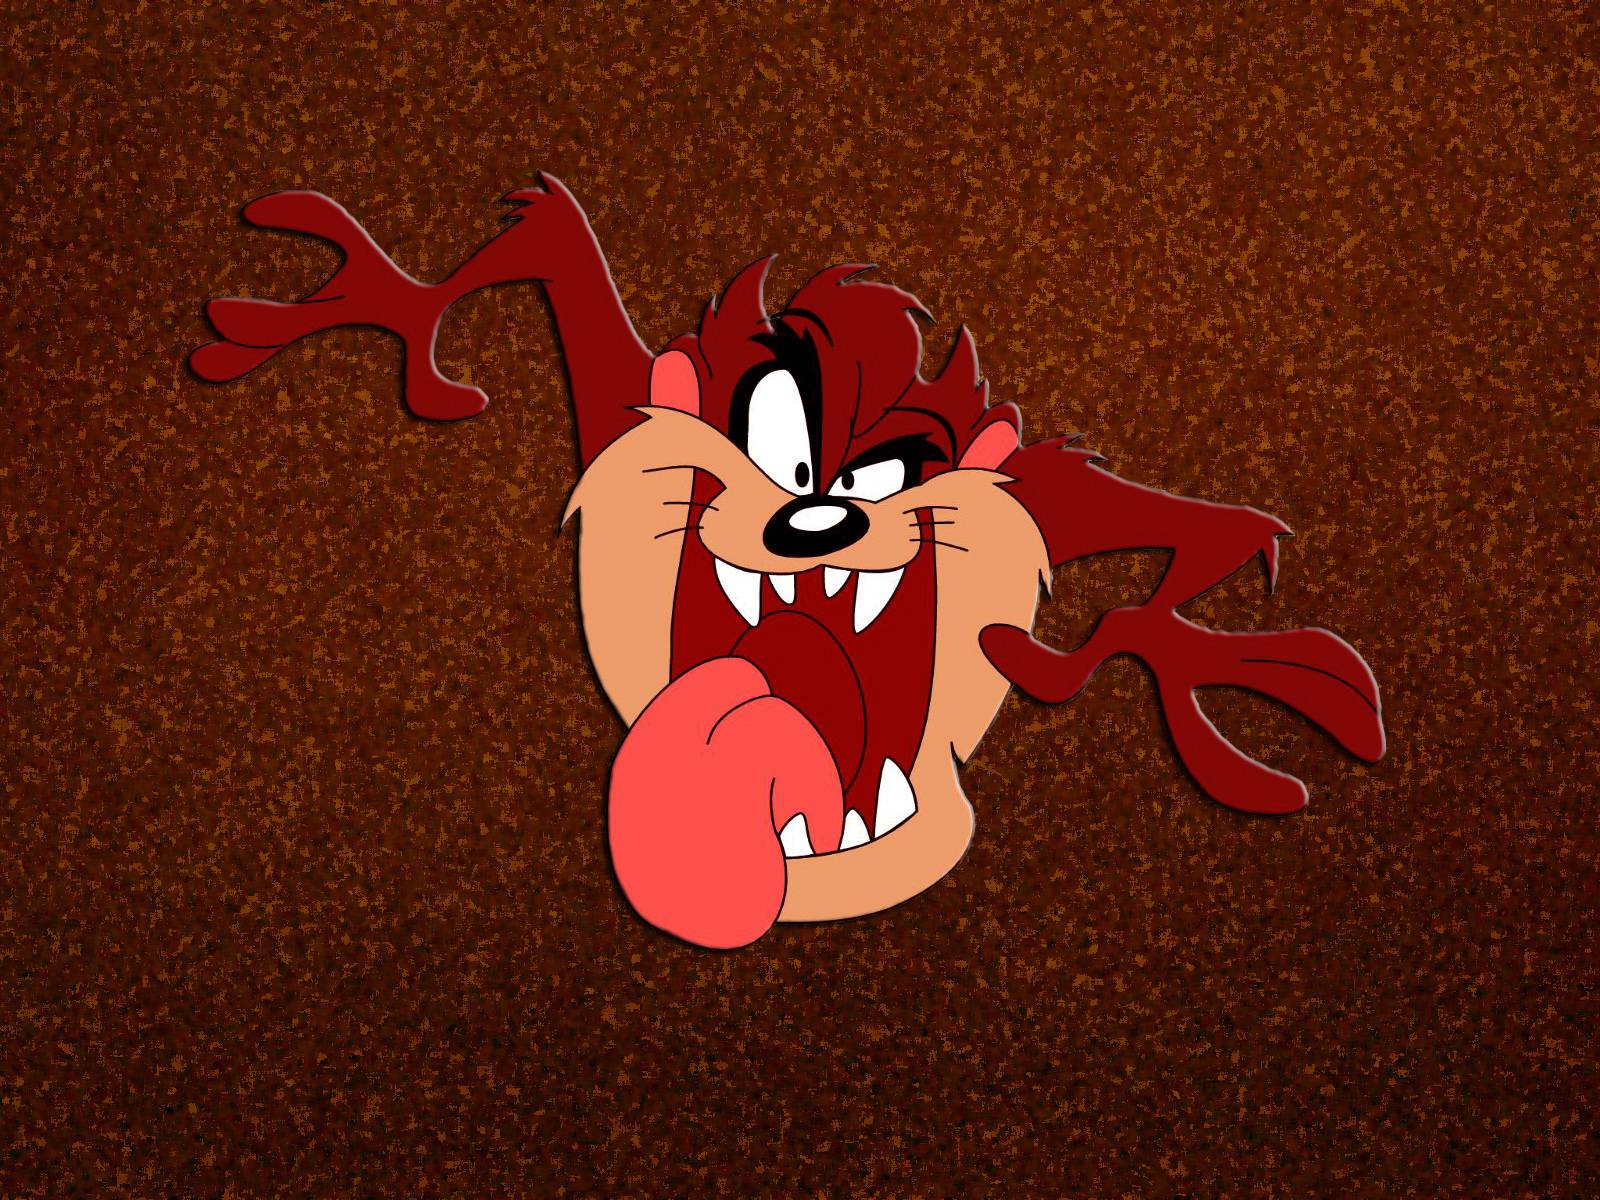 The Tasmanian Devil Cartoon Picture Wallpapers 0430231922 The